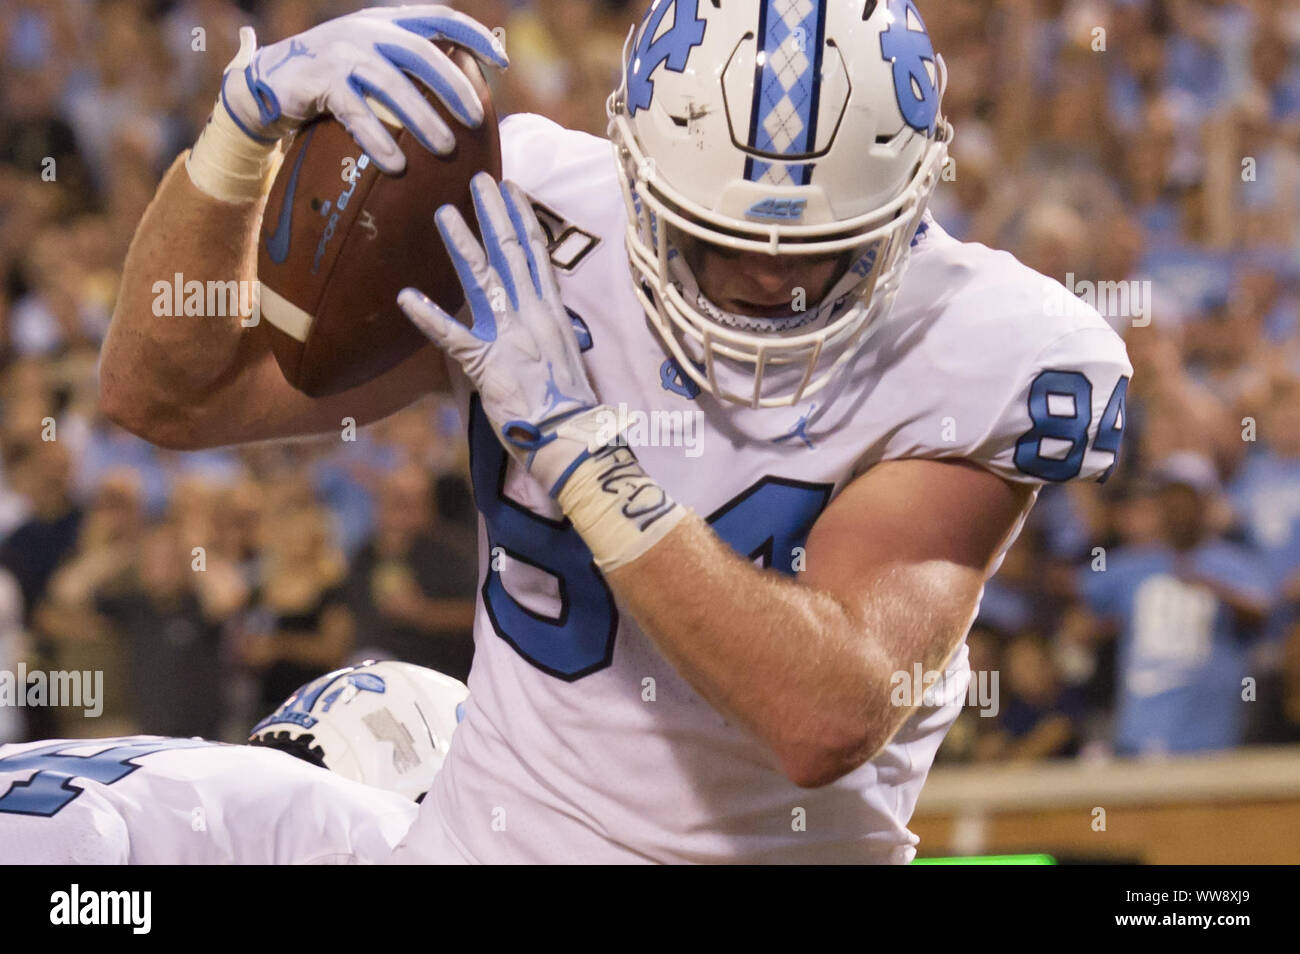 Winston-Salem, North Carolina, USA. 13th Sep, 2019. North Carolina tight end, Garrett Walston (84), catches a pass for the two-point conversion in the fourth quarter of an NCAA football game between the North Carolina Tarheels and the Wake Forest Demon Deacons at BB&T Field in Winston-Salem, North Carolina on September 12, 2019. Credit: Spencer Lee/ZUMA Wire/Alamy Live News Stock Photo